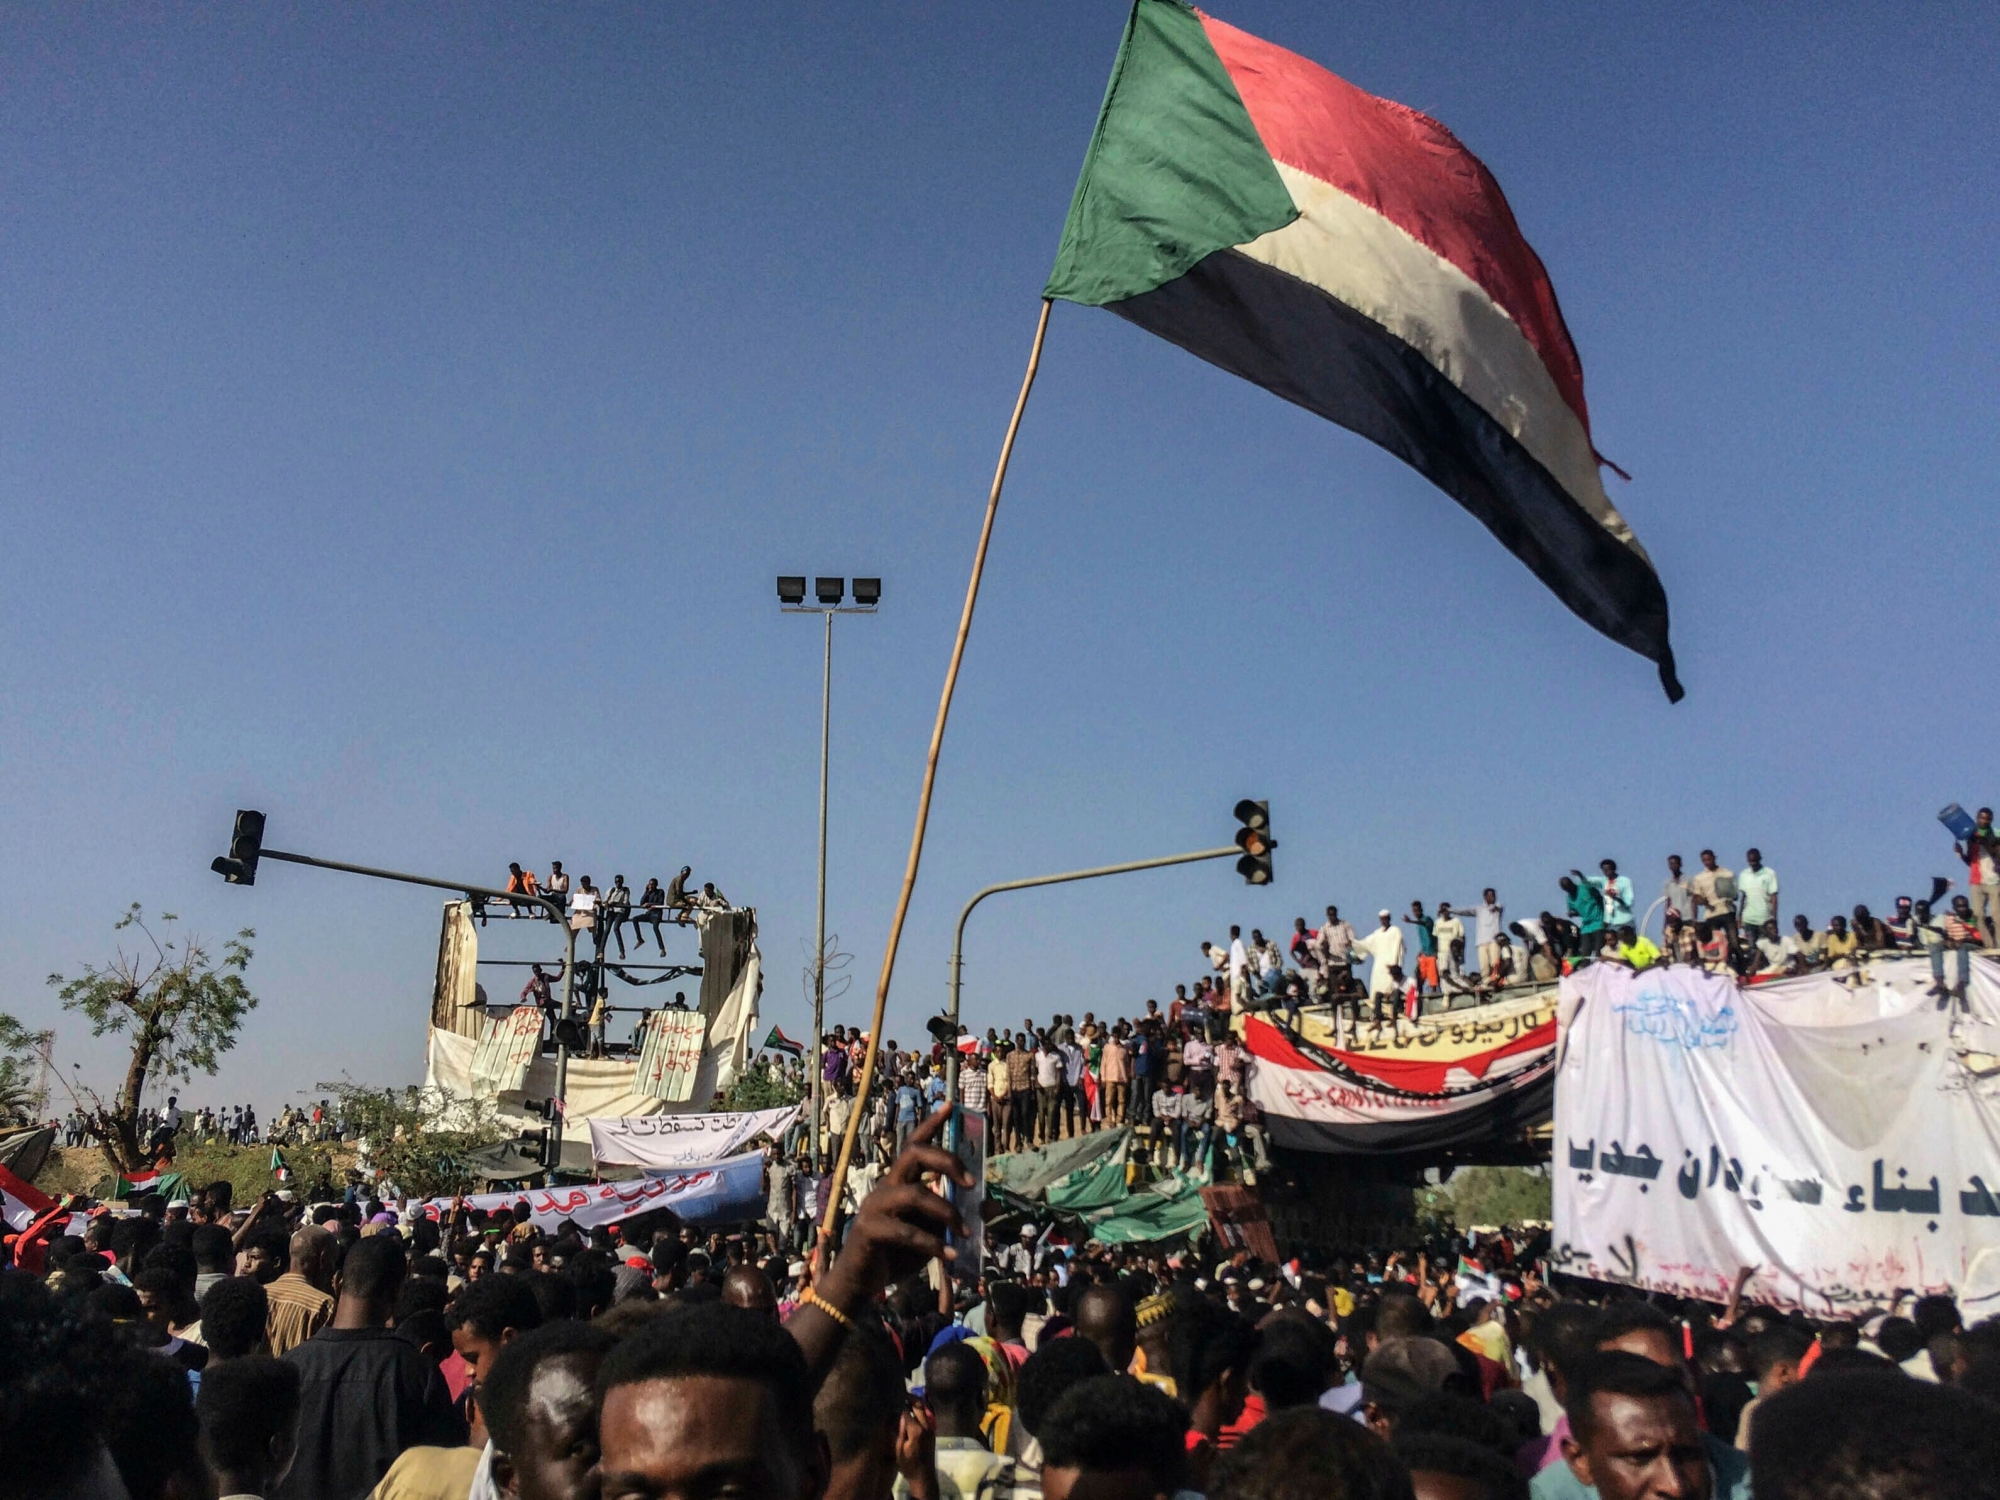 Sudanese demonstrators march with national flags as they gather during a rally demanding a civilian body to lead the transition to democracy, outside the army headquarters in the Sudanese capital Khartoum on Saturday, April 13, 2019.   The military overthrew President Omar al-Bashir on Thursday after almost four months of protests calling for an end to his nearly 30-year rule.  (AP Photo) Sudan